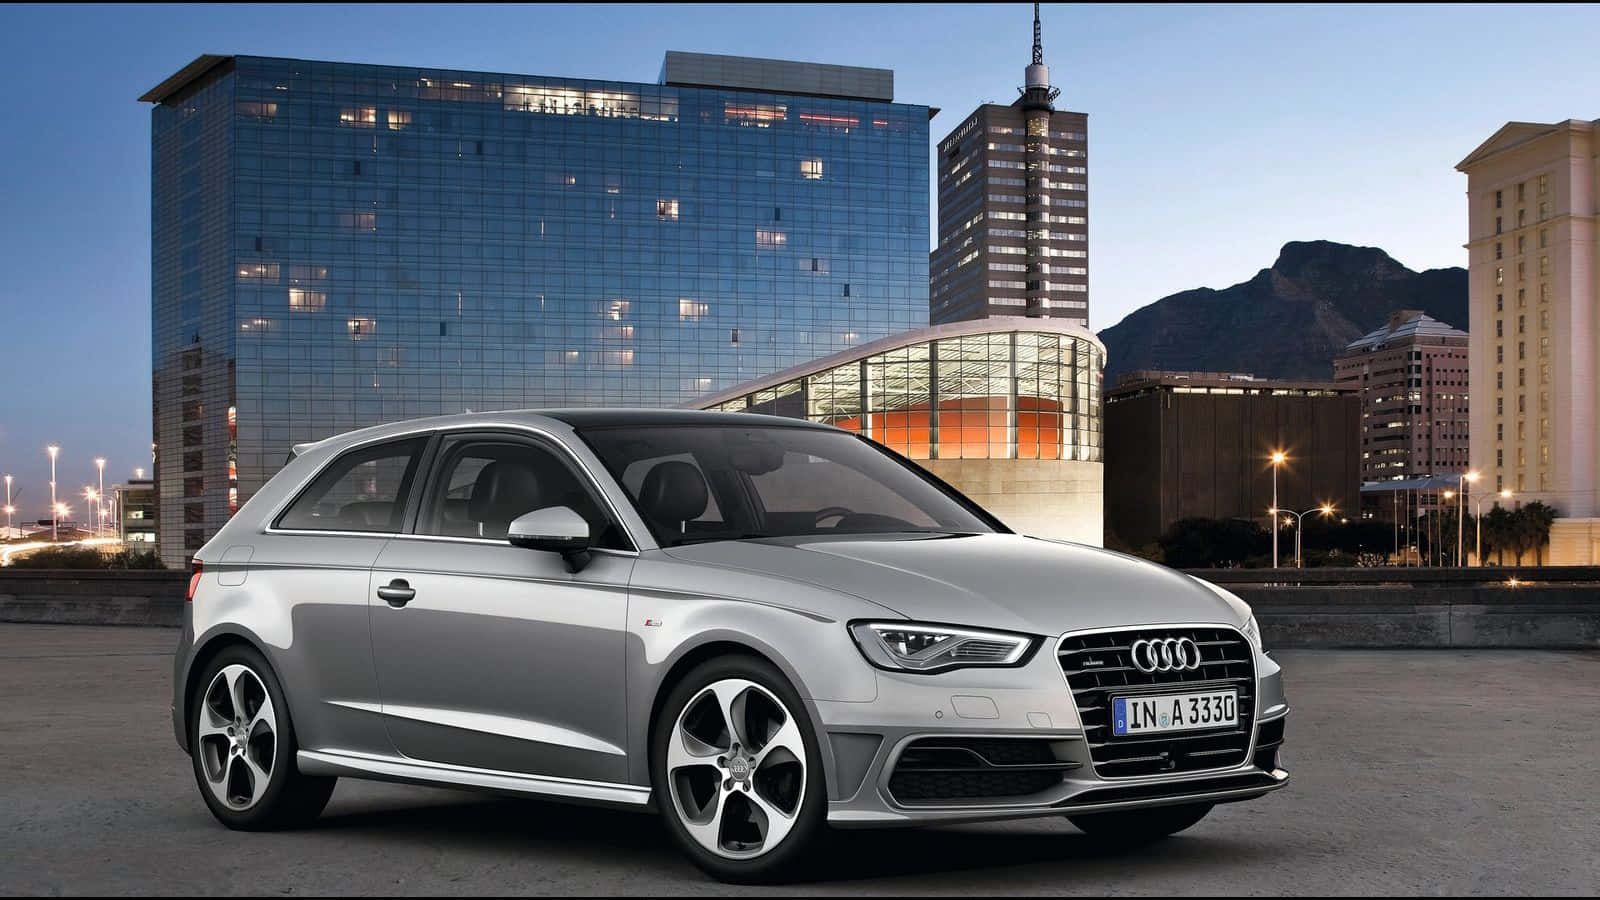 Audi A3 Sportback on the Road Wallpaper